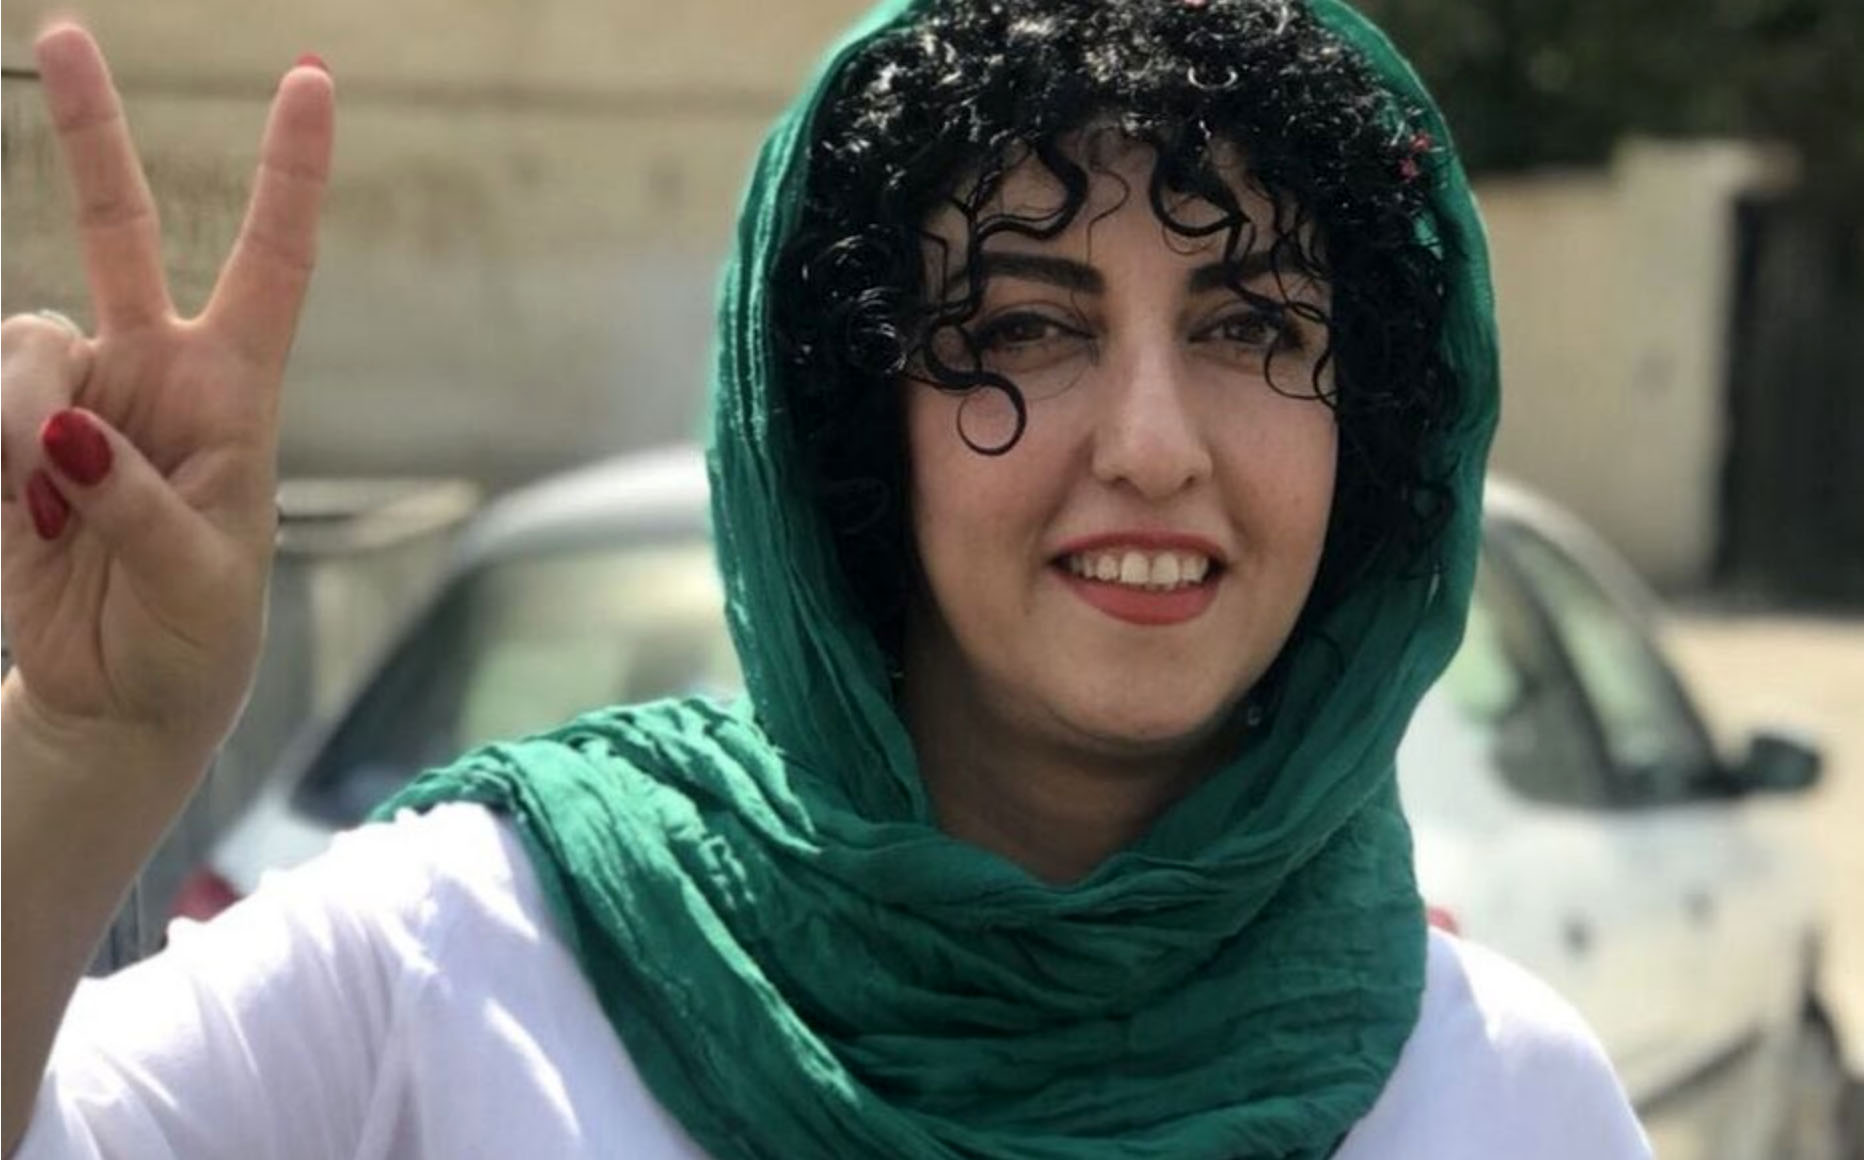 The Struggle for Freedom: Iranian human rights activist Narges Mohammadi  advocates for 'Women, Life, and Freedom' from prison | George W. Bush  Presidential Center